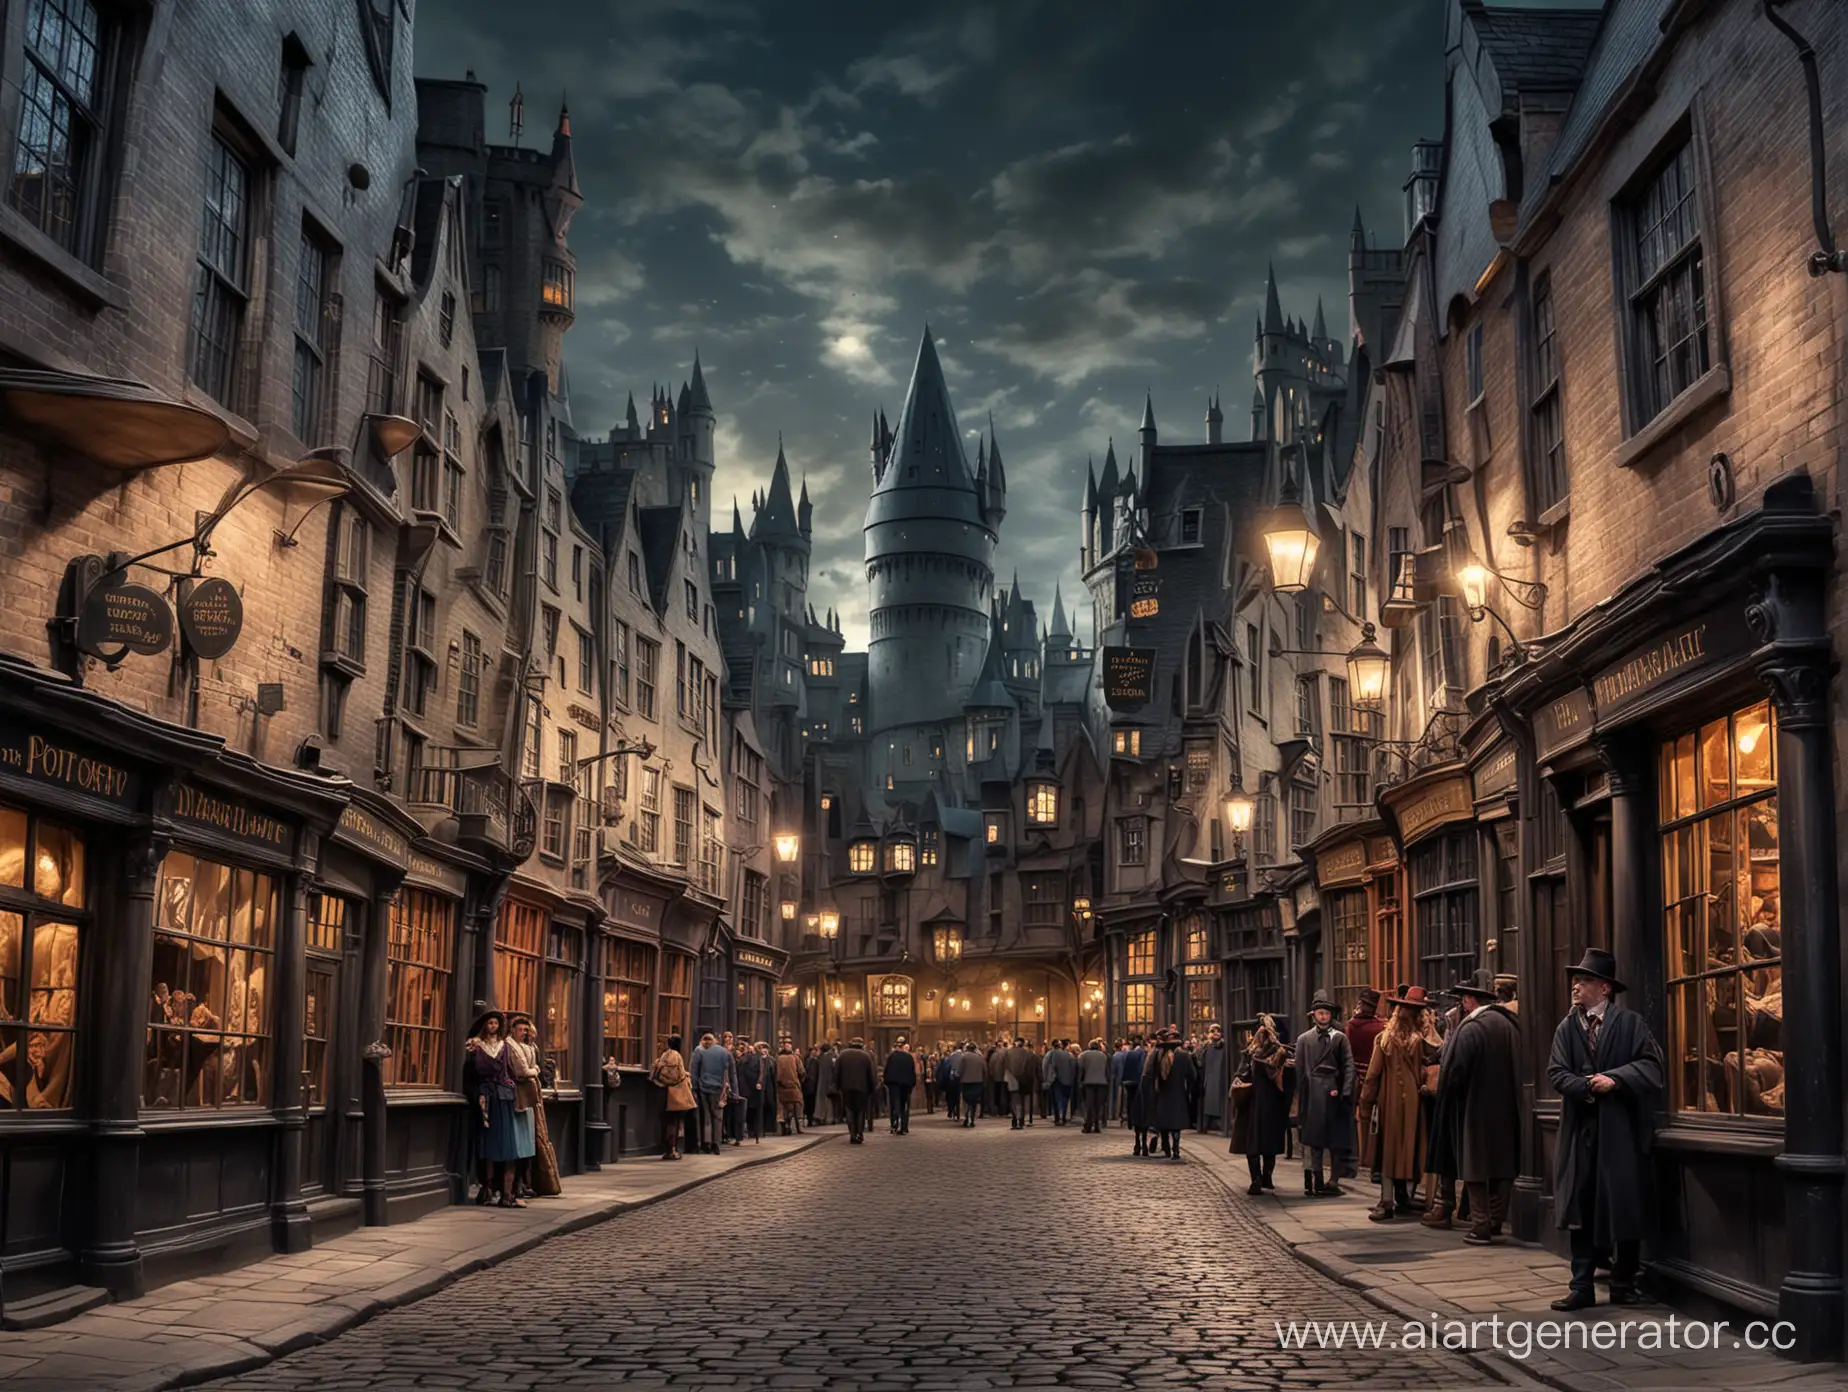 Diagon Alley from Harry Potter with a magical atmosphere and wizards in hats